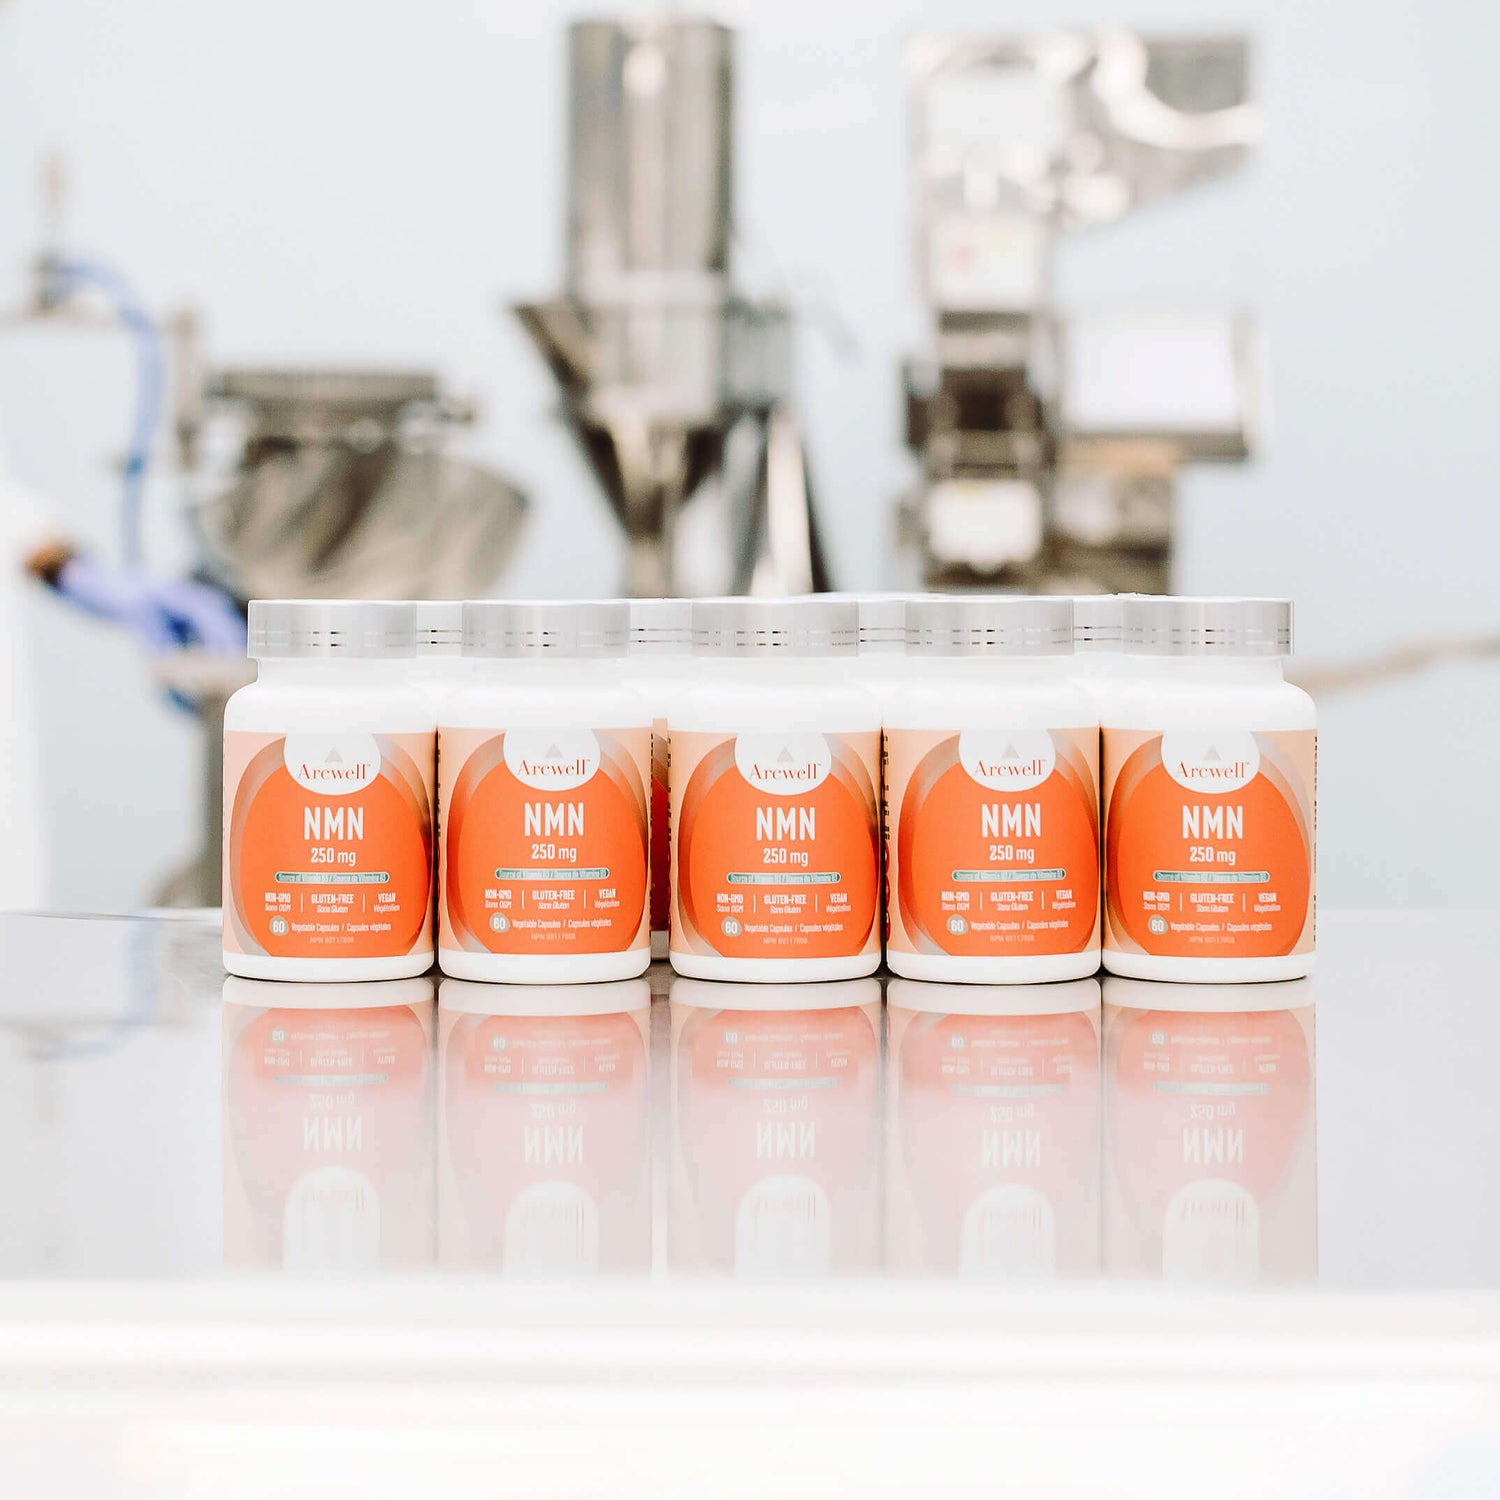 Unlike most supplement companies, we use small batch production to achieve a cleaner, purer product that is FREE of unnecessary additives and many allergens. Arcwell™ is the freshest choice among all the other supplements on the market.